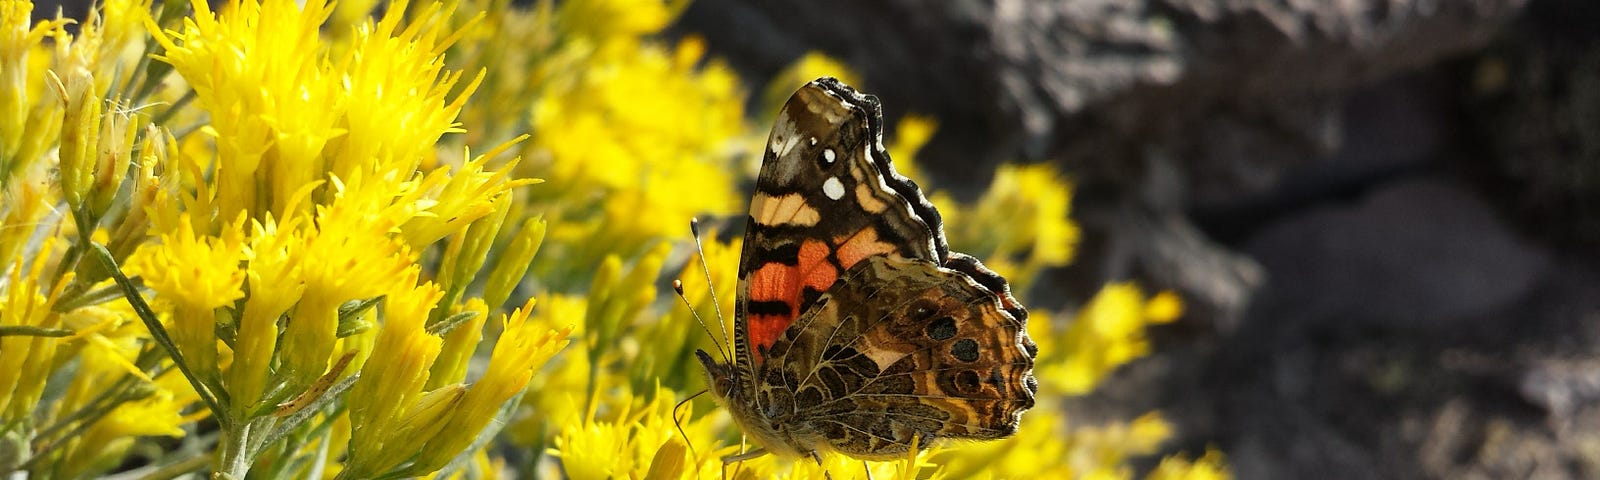 orange, tan and black butterfly on yellow bush